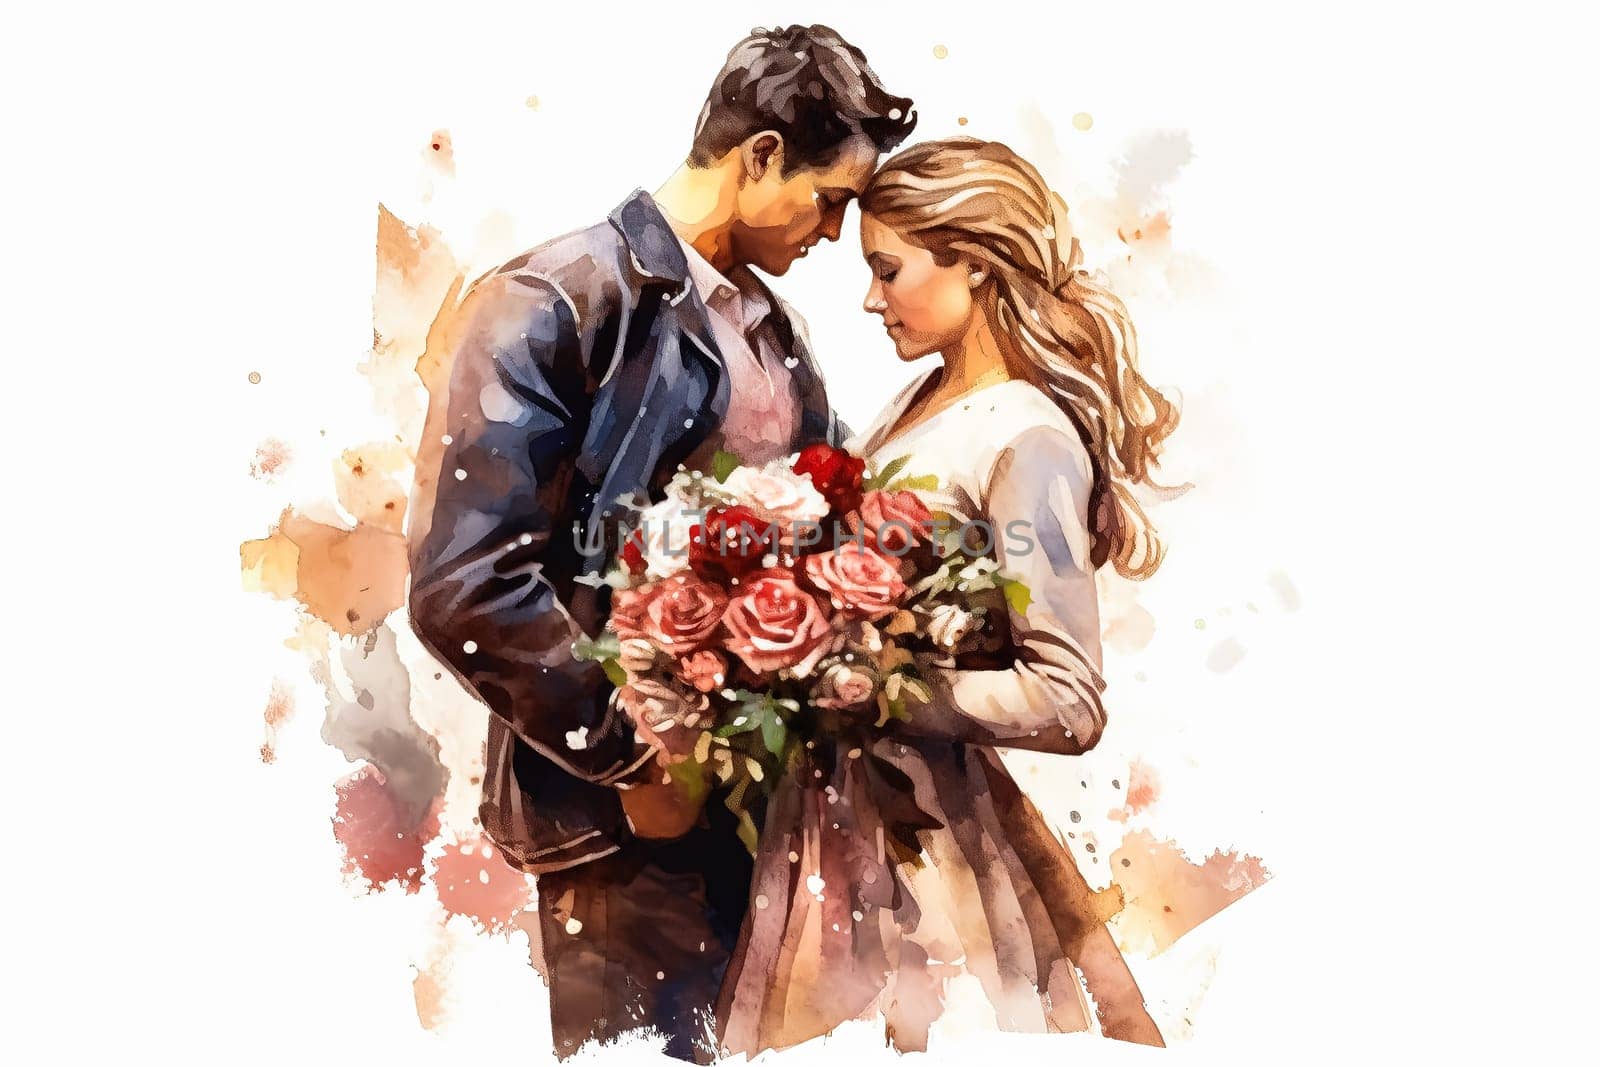 Celebrate the union of love with a watercolor illustration capturing the essence of a newlywed couple, radiating joy and romance on their wedding day.